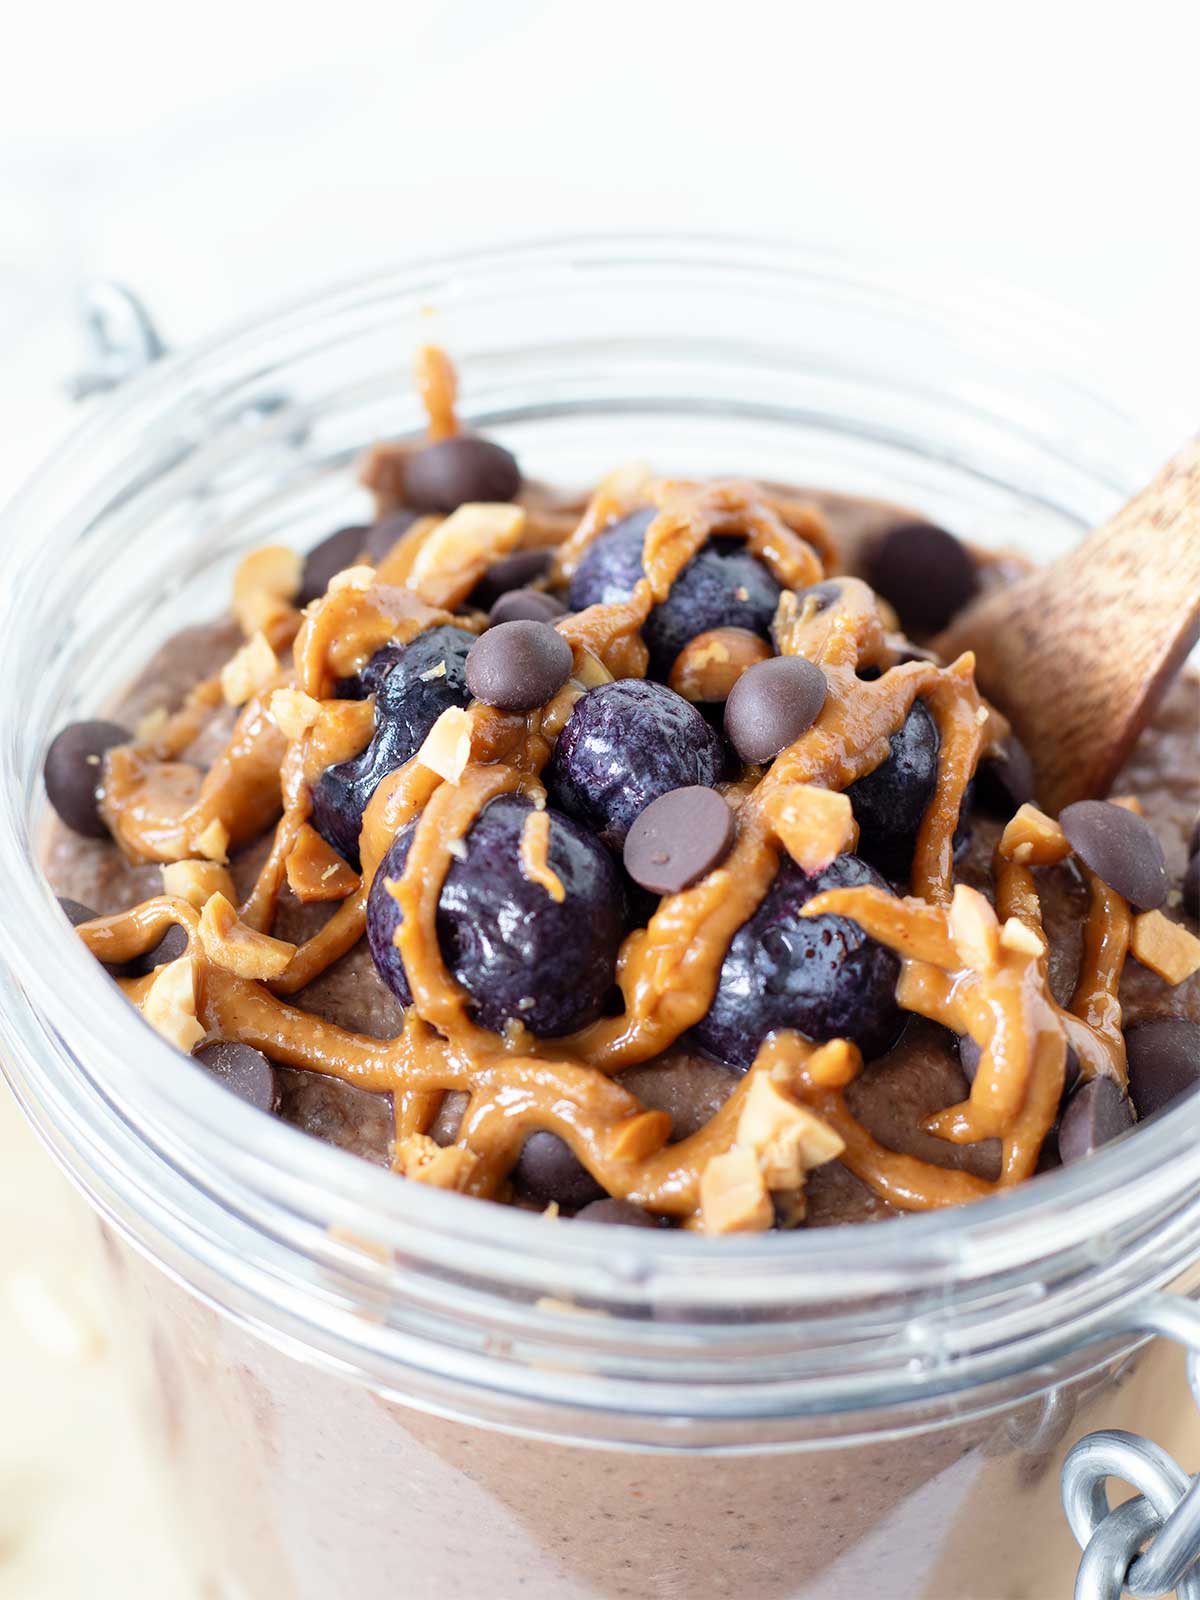 Chocolate blended overnight oats without protein powder and no banana